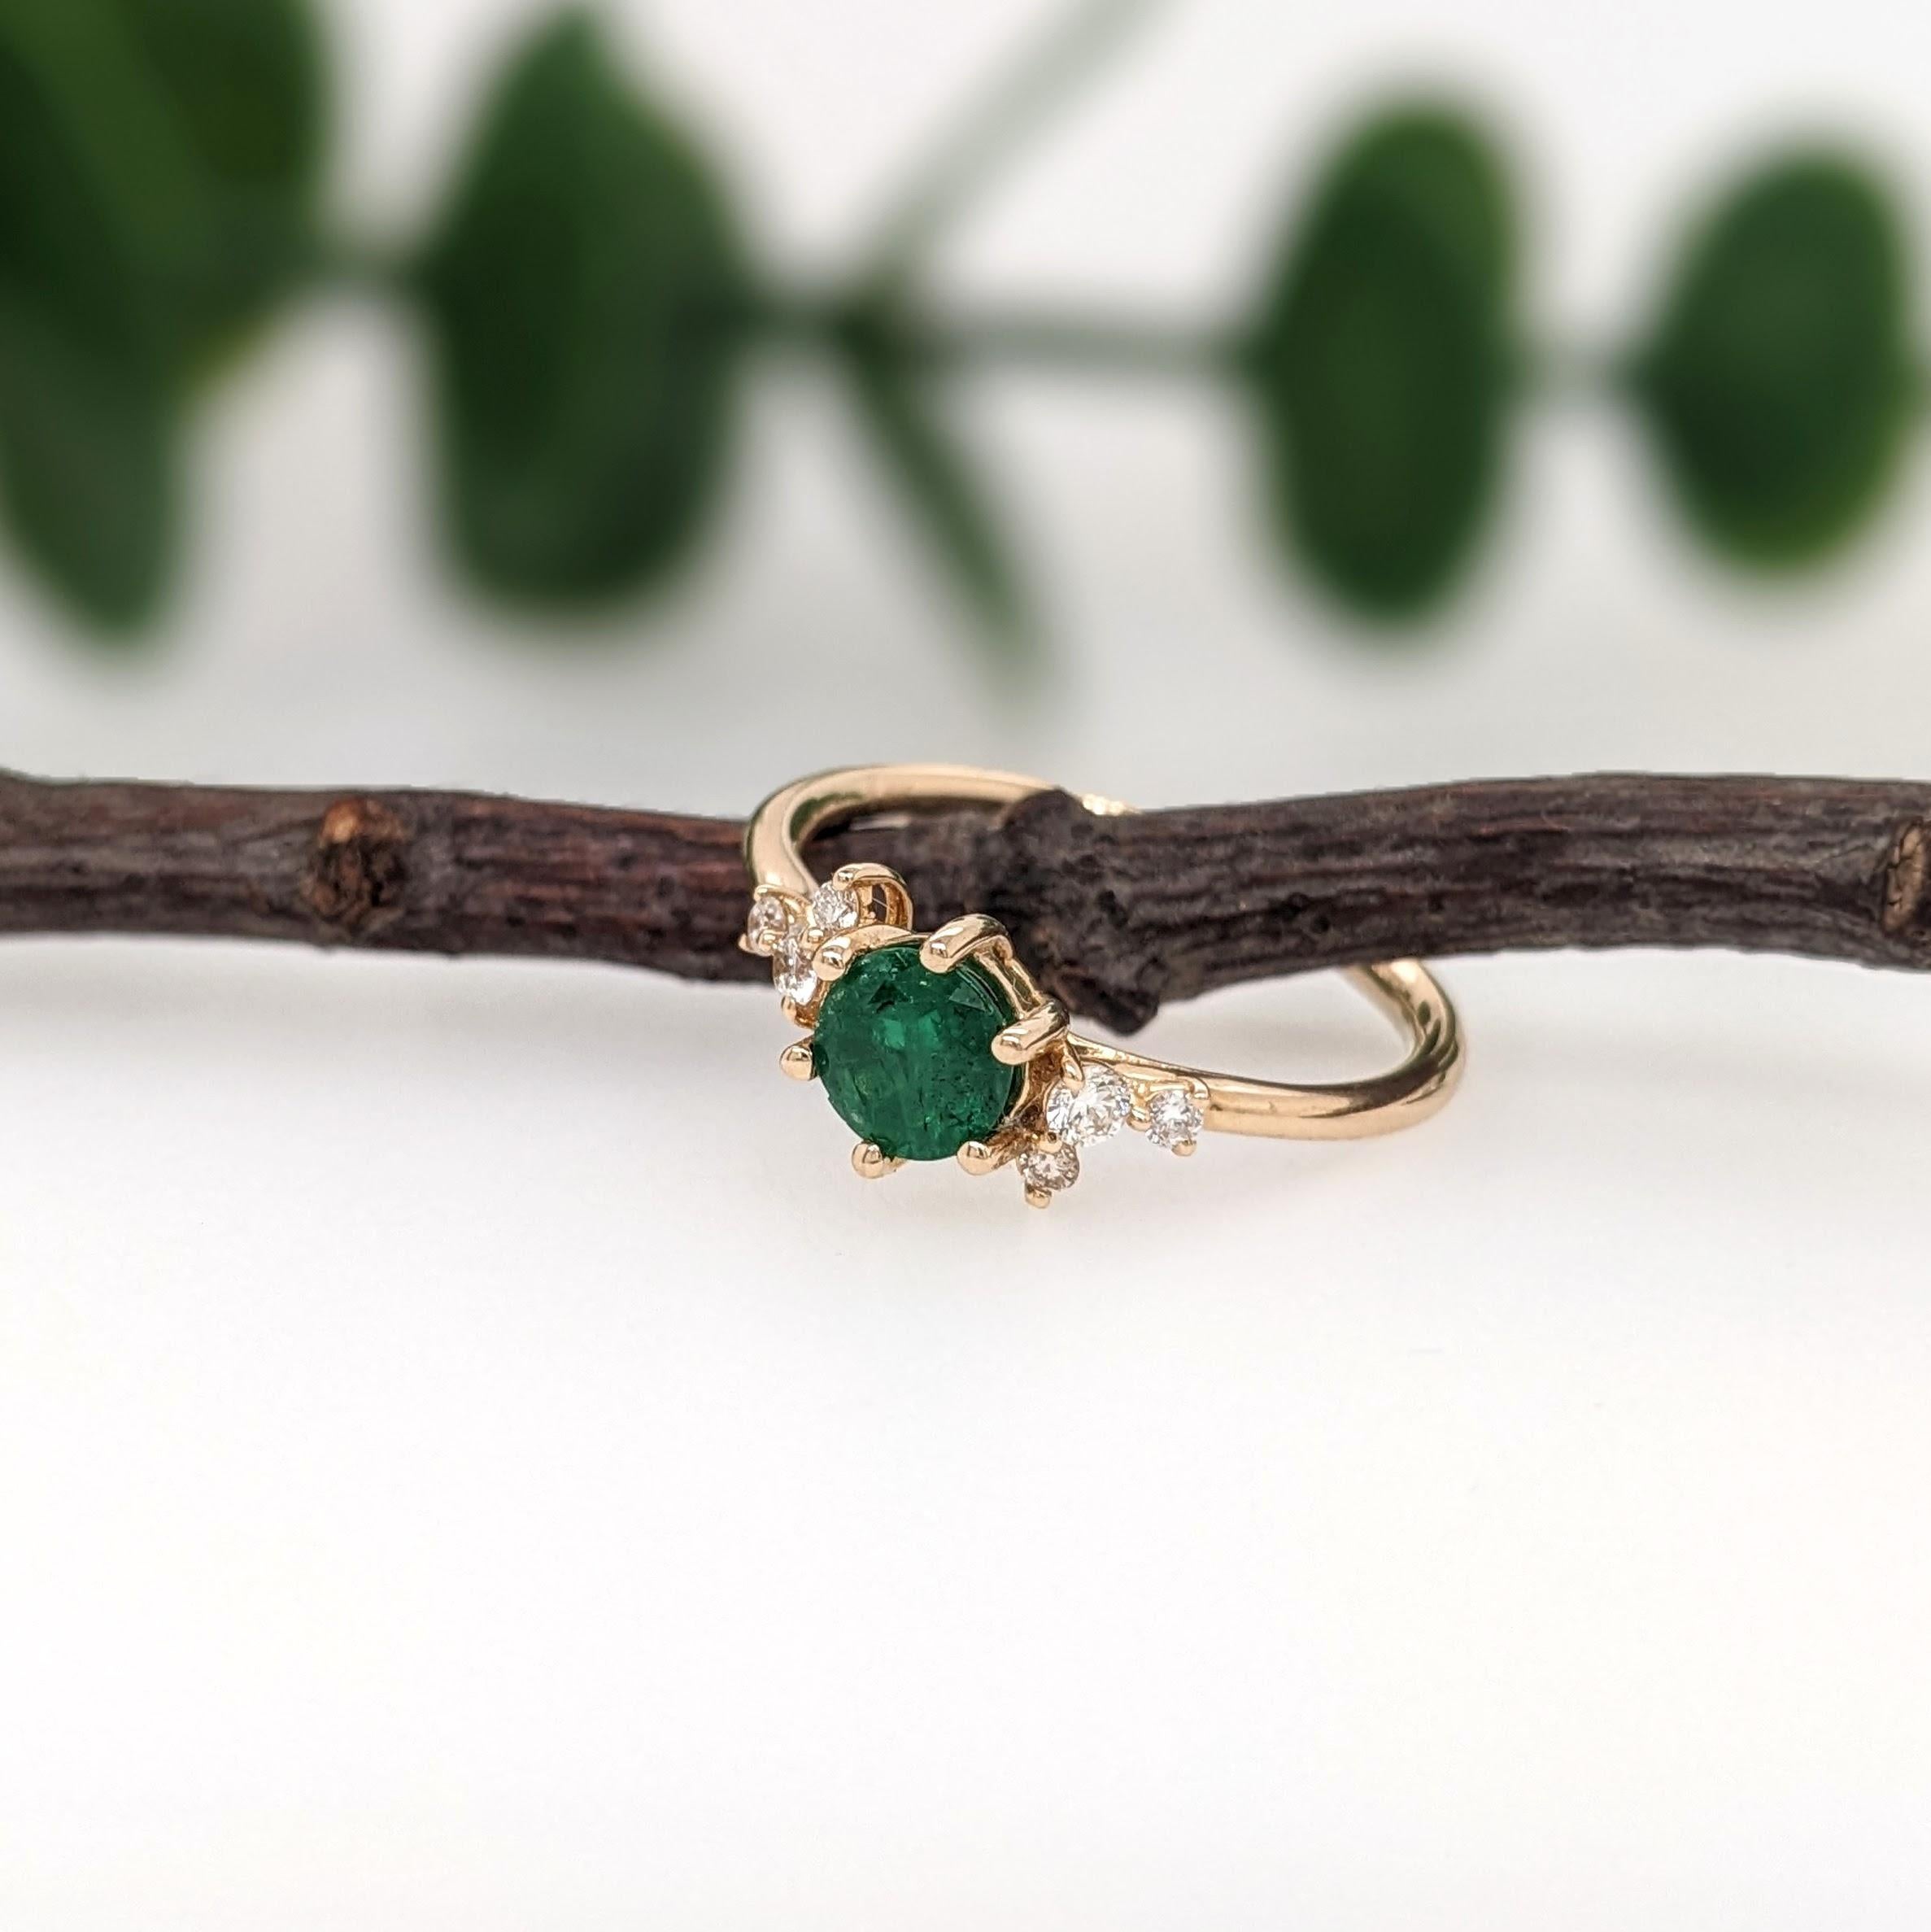 Modern Green Emerald Ring w Earth Mined Diamonds in Solid 14k Yellow Gold Round 5mm